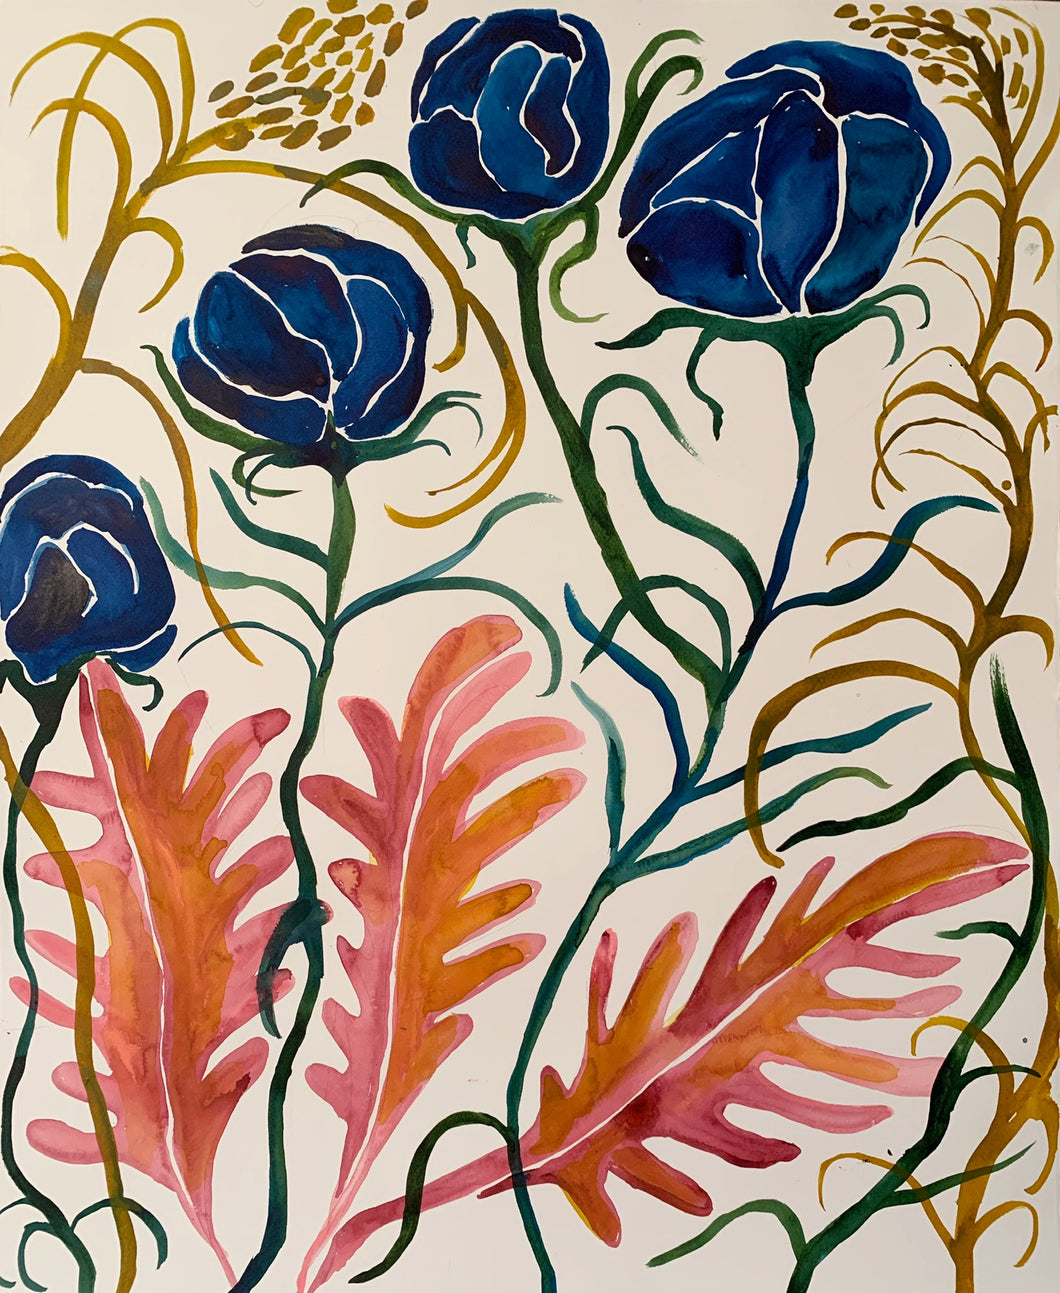 Blue Buds Pink Leaves 25x30